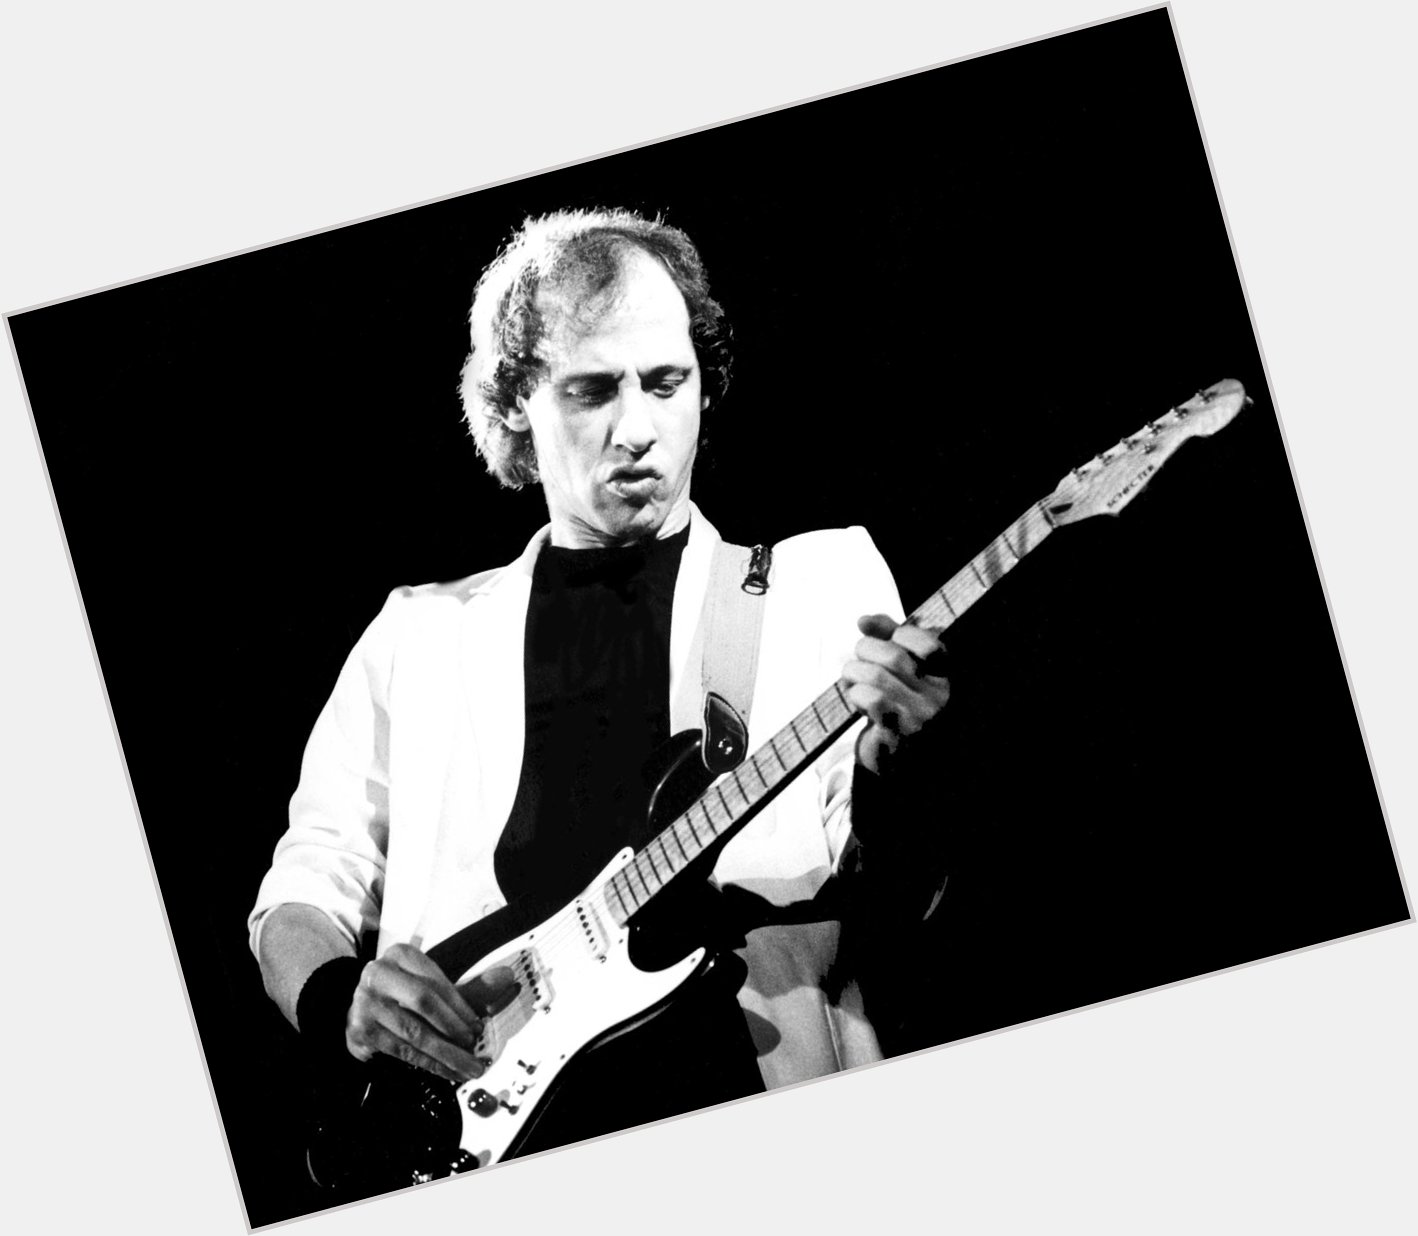 Happy Birthday to the Sultan of Swing, Mark Knopfler! 